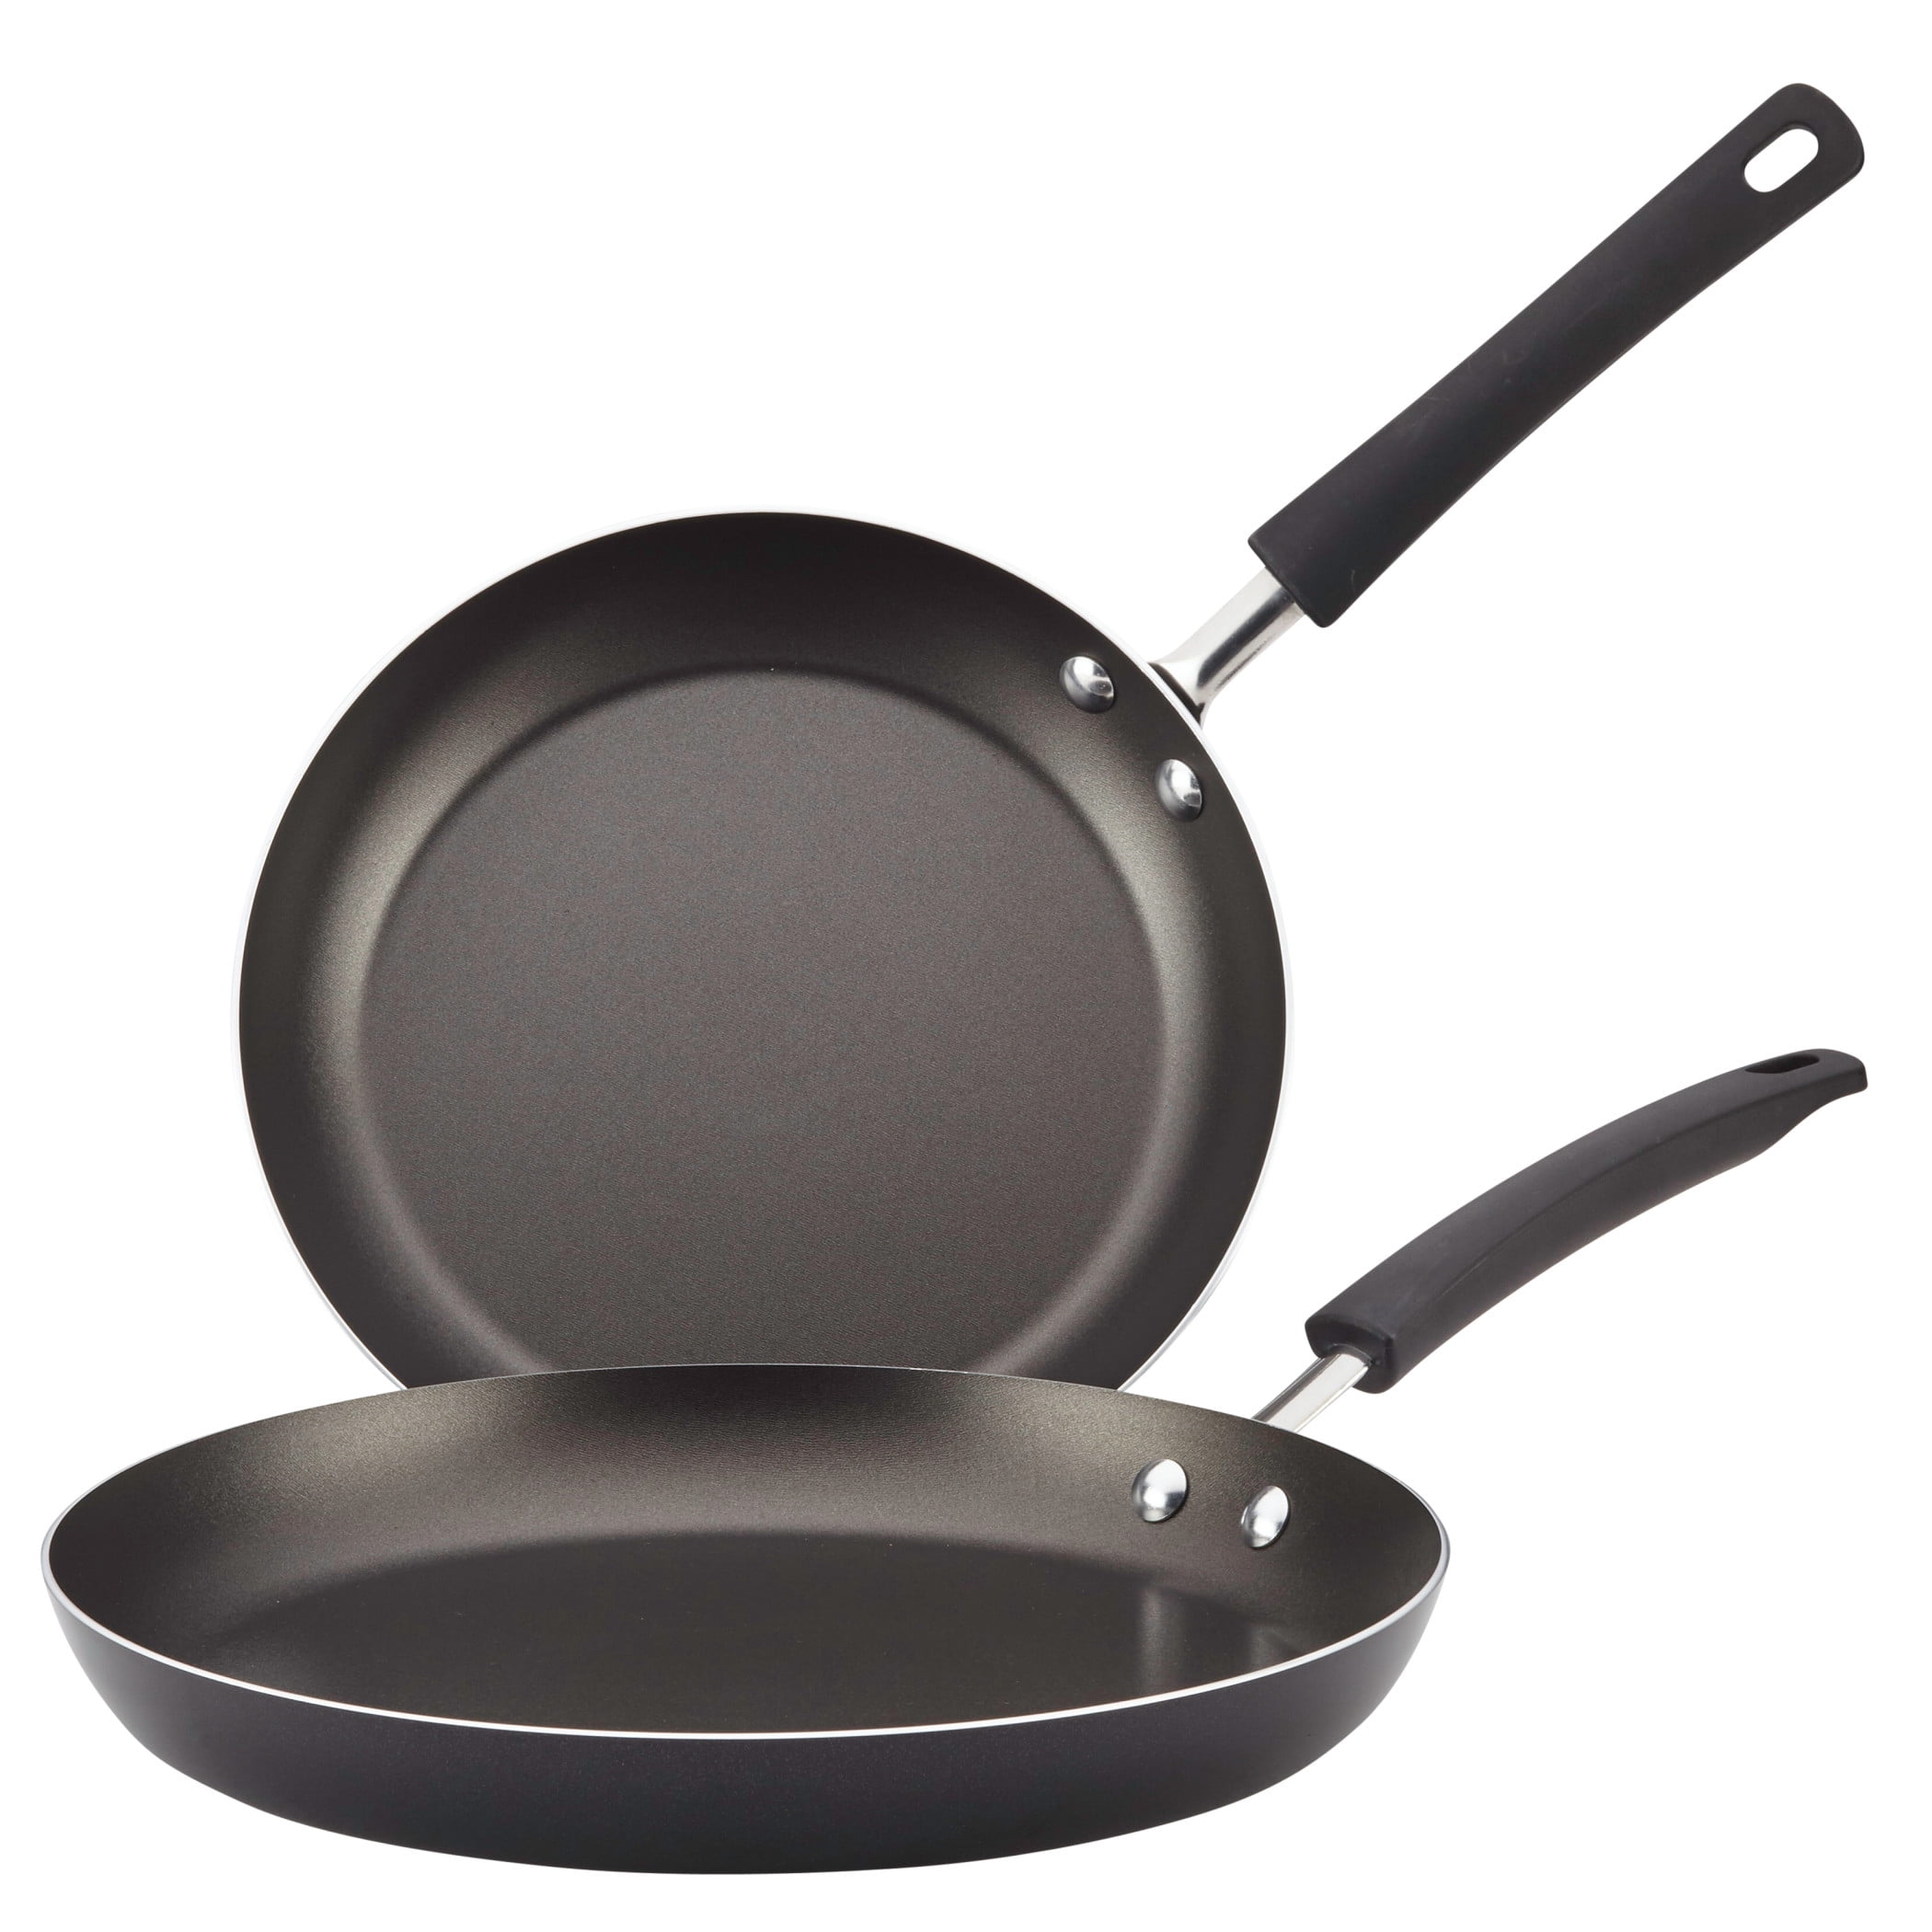 Essential Everyday Dishwasher Safe Details about   Non-Stick Frying Pan and Griddle 3 Piece Set 